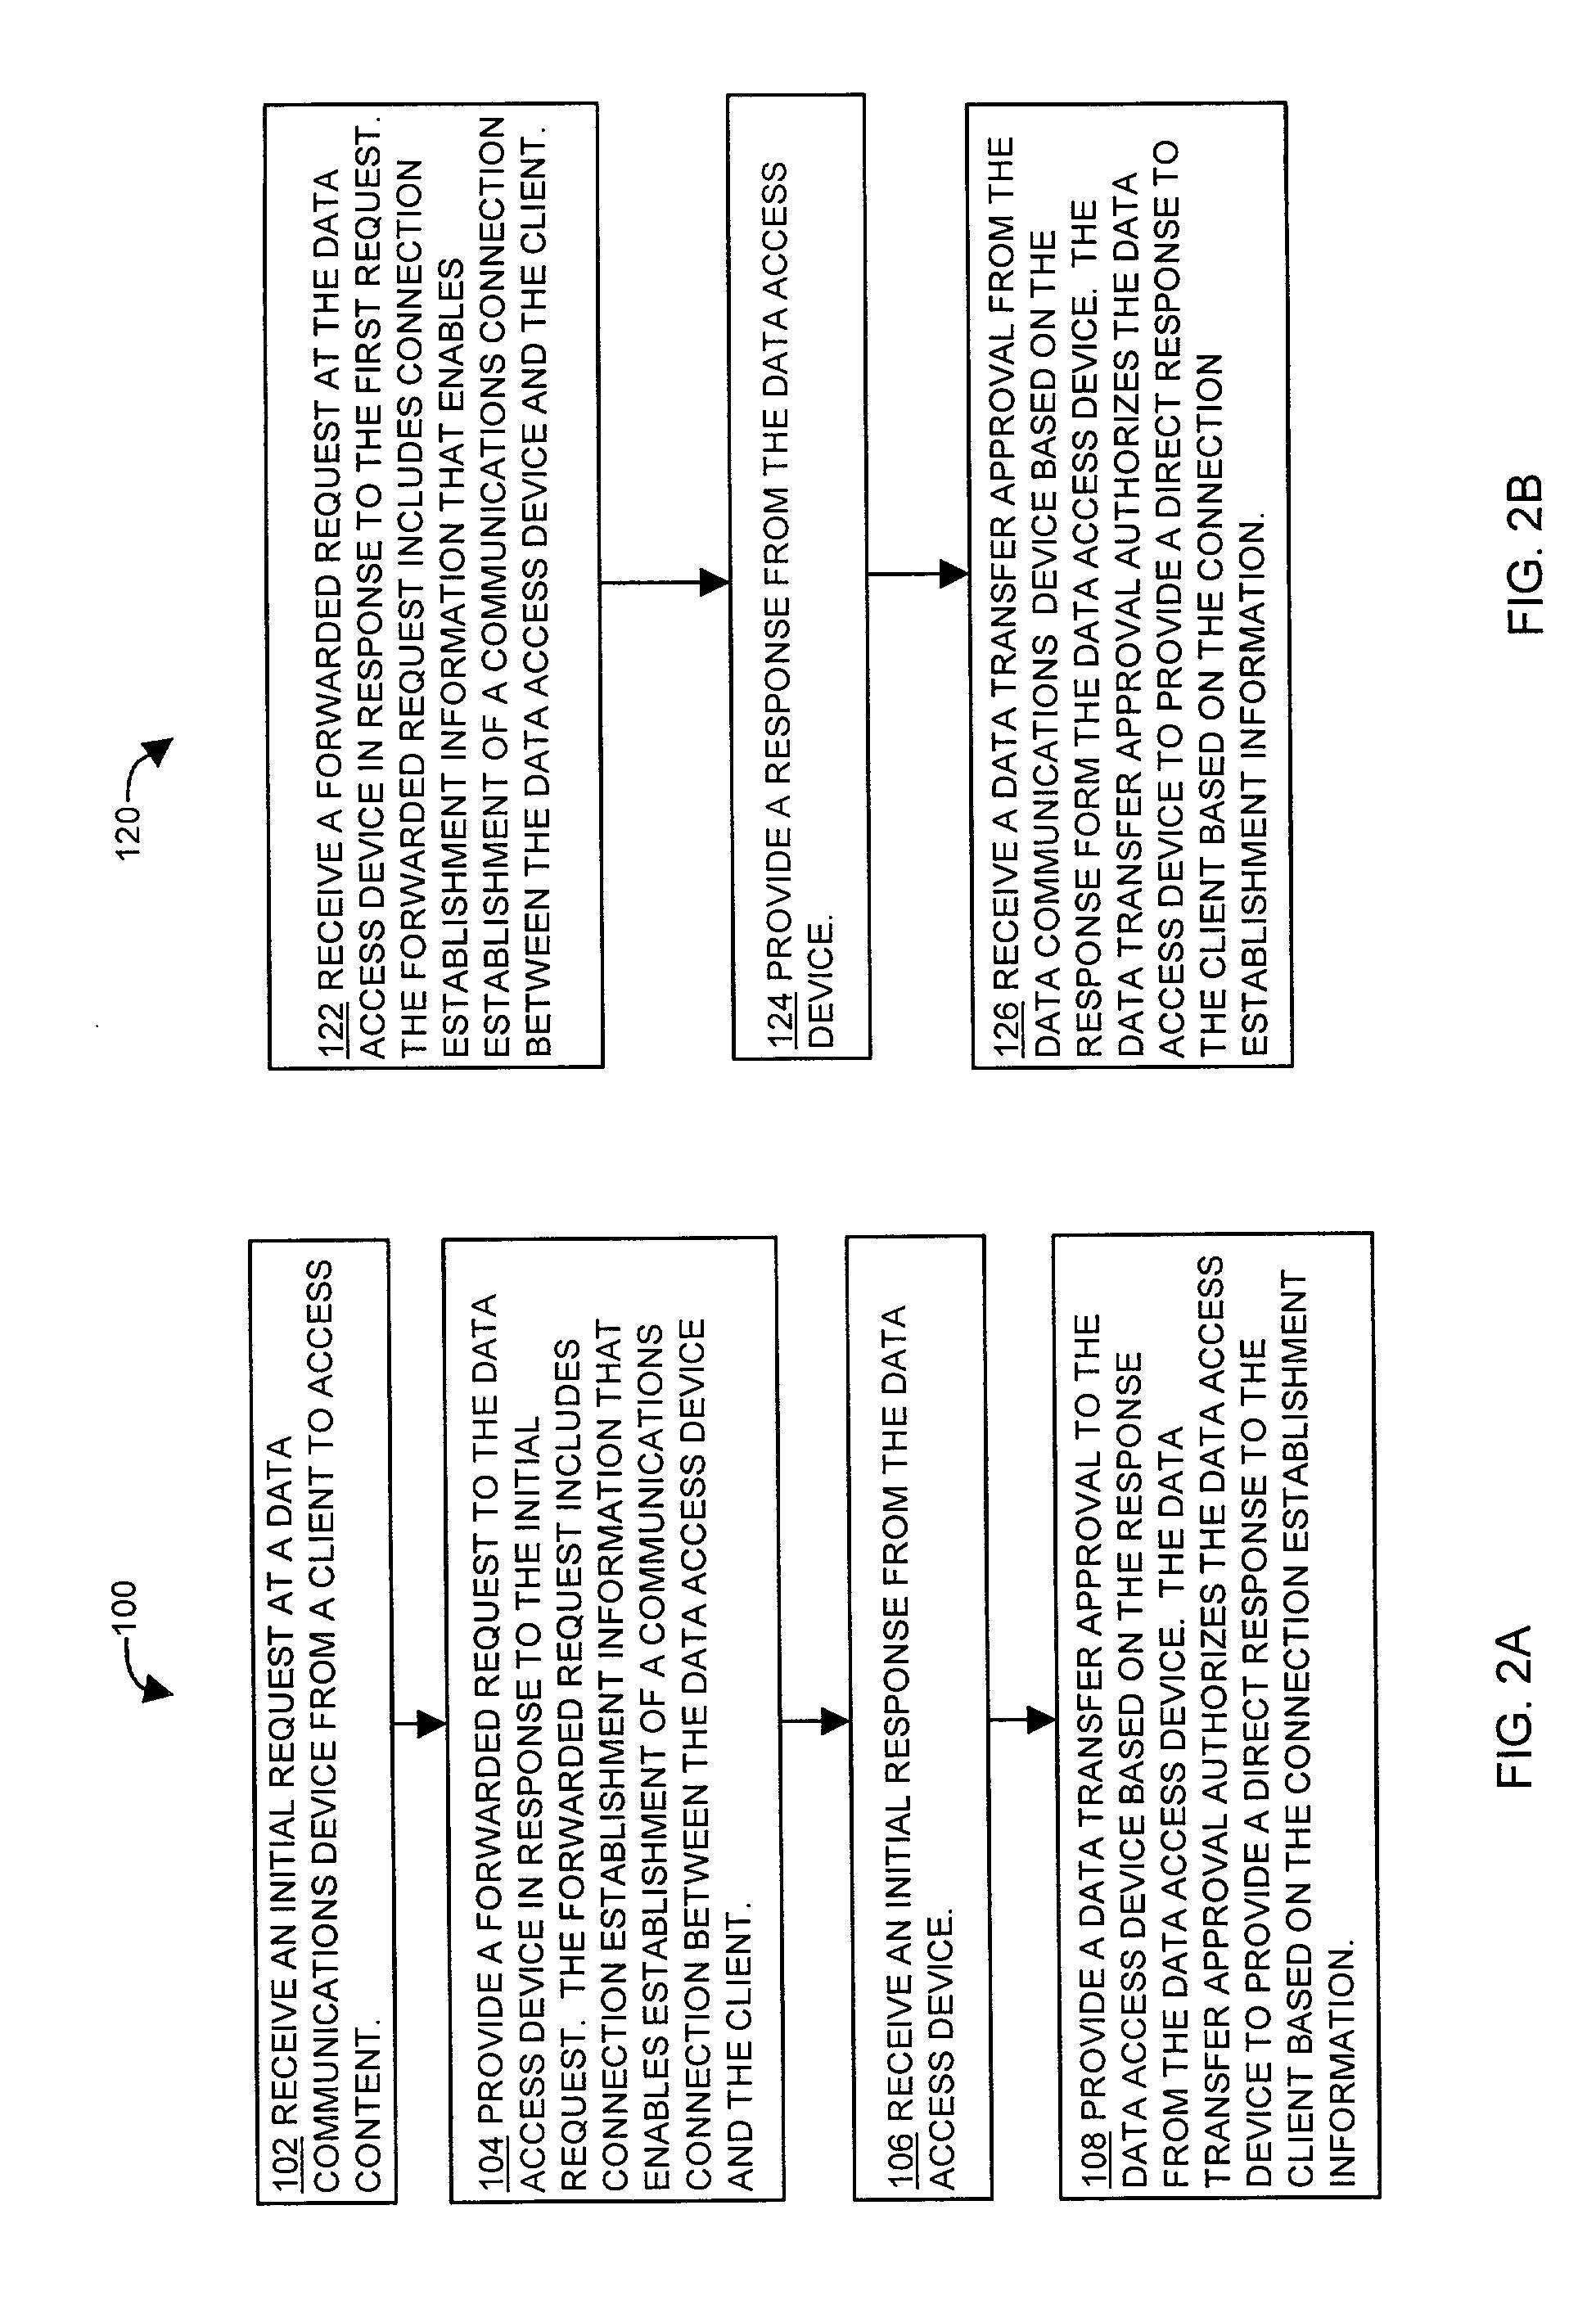 Methods and apparatus for managing access to data through a network device